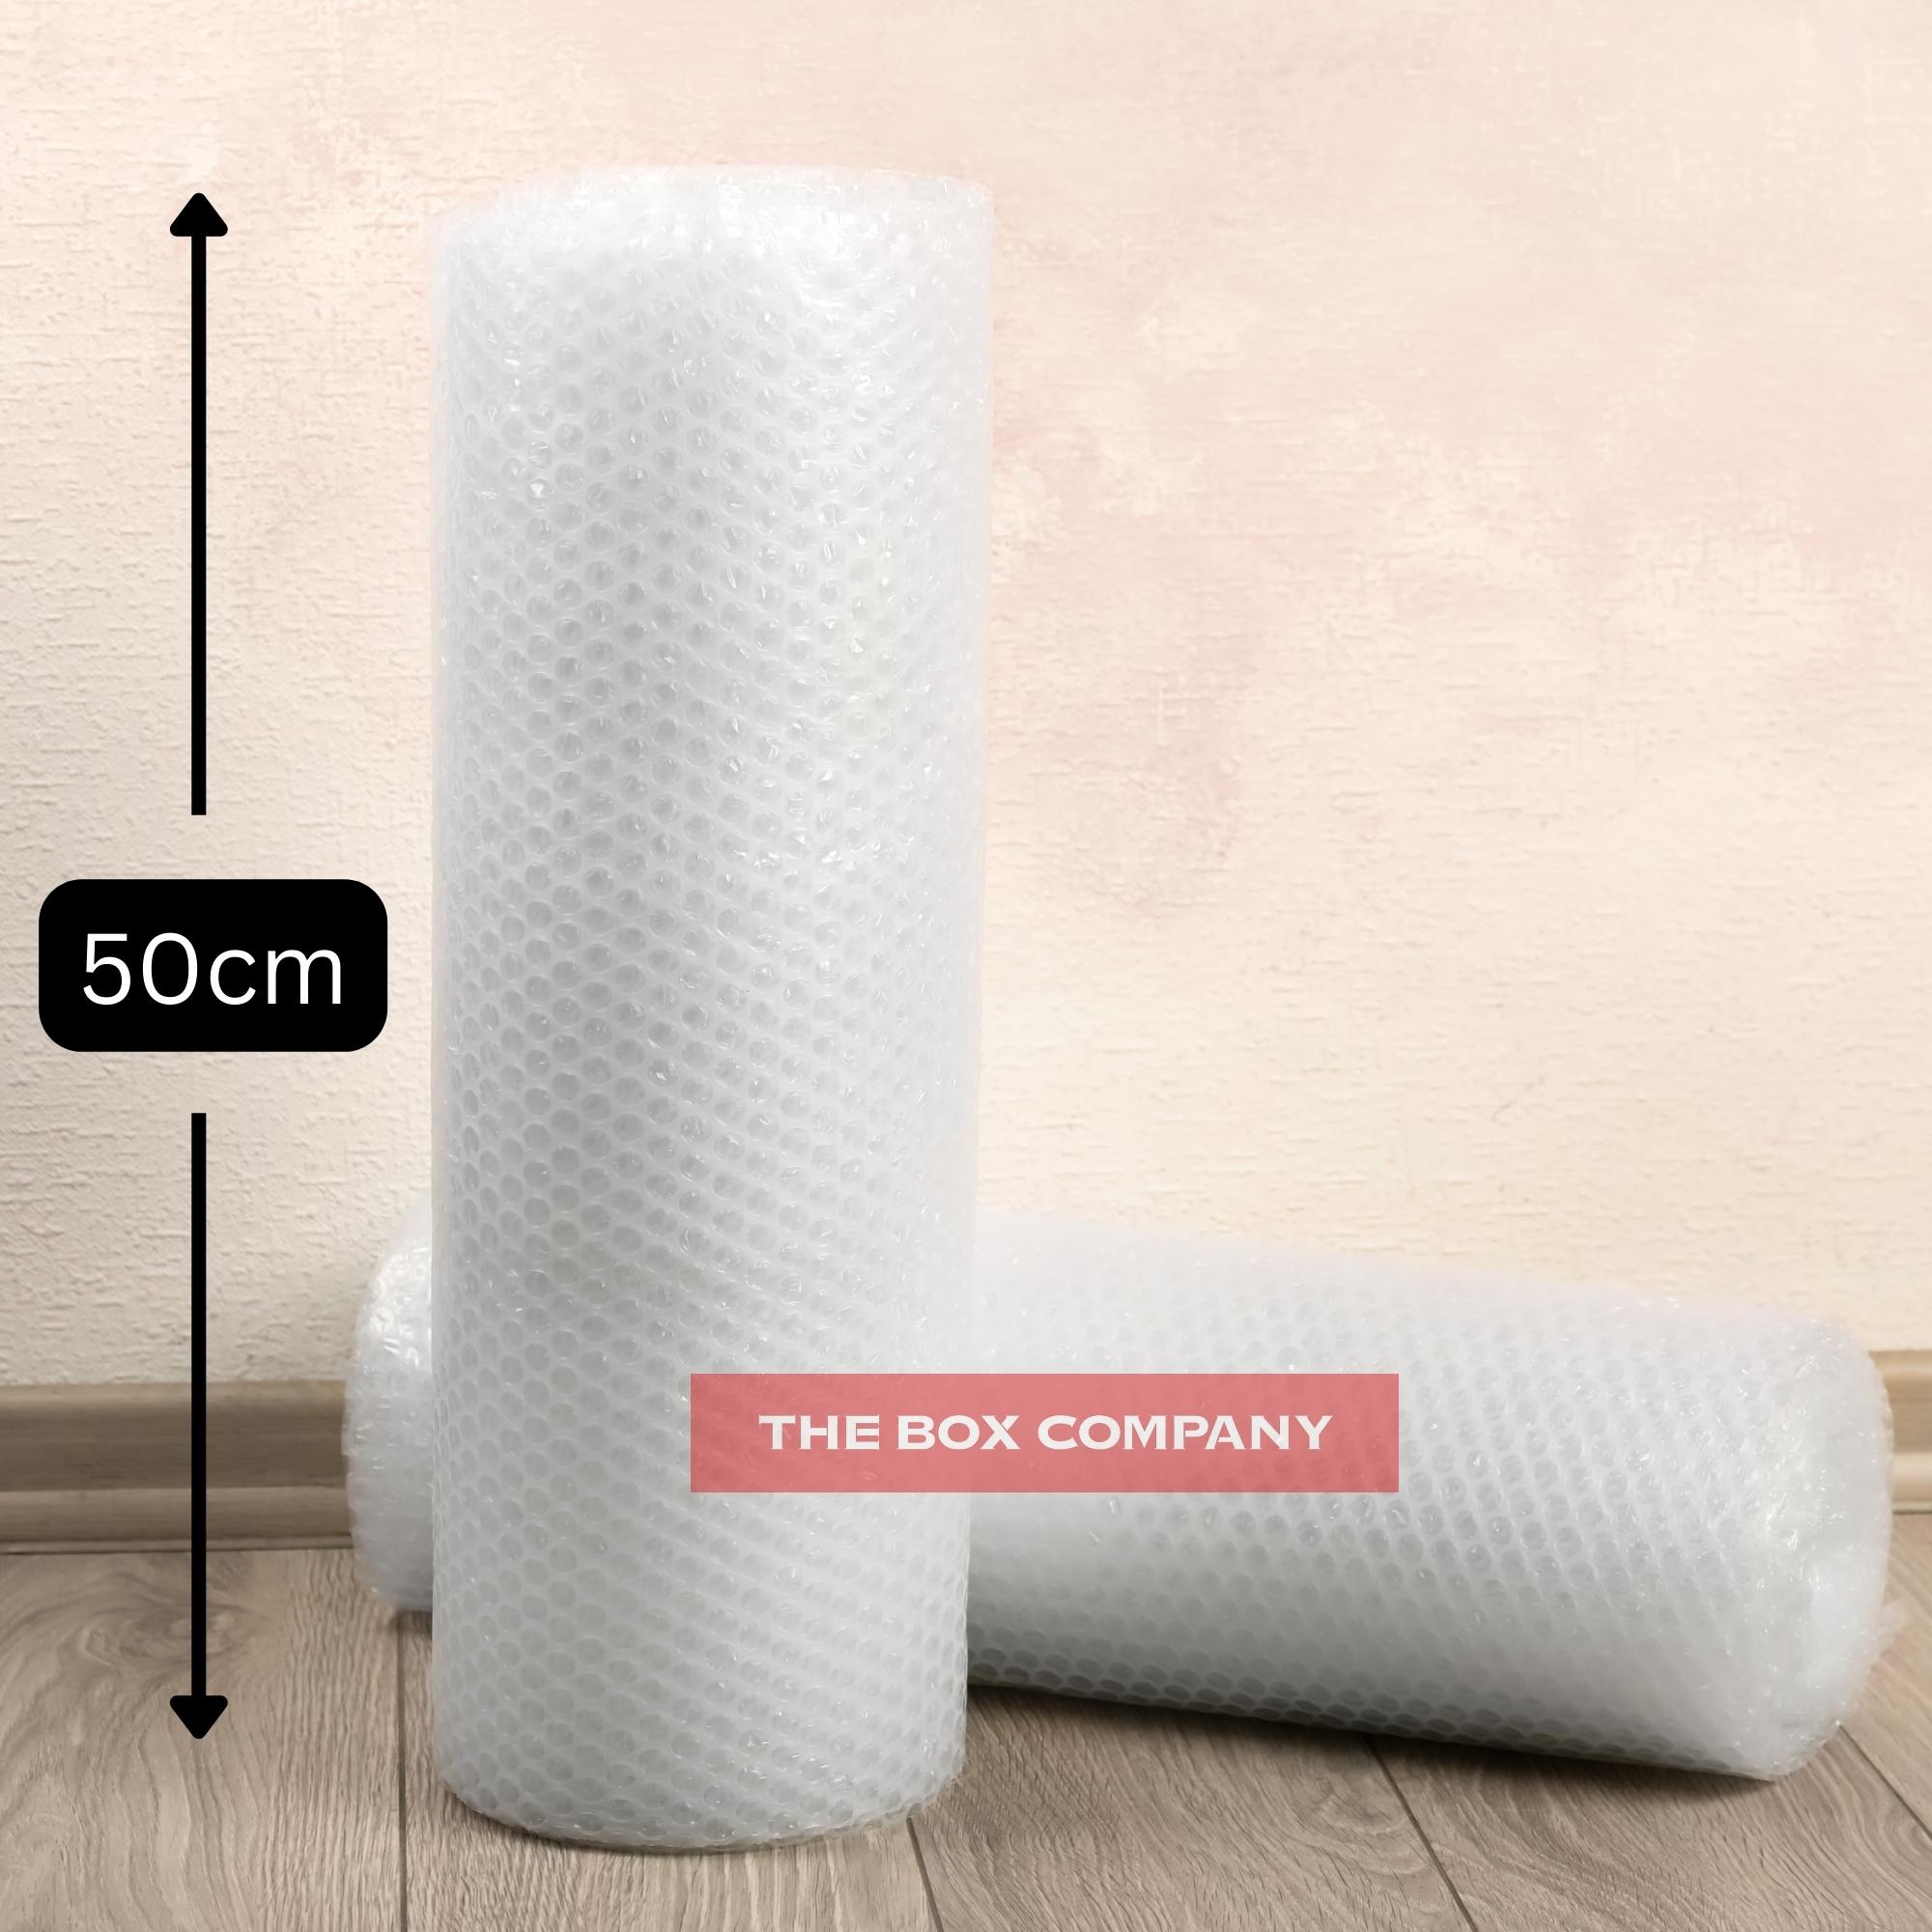 Multi-Purpose Bubble Wrap, Air Bubble Roll, Goods Protection Clear